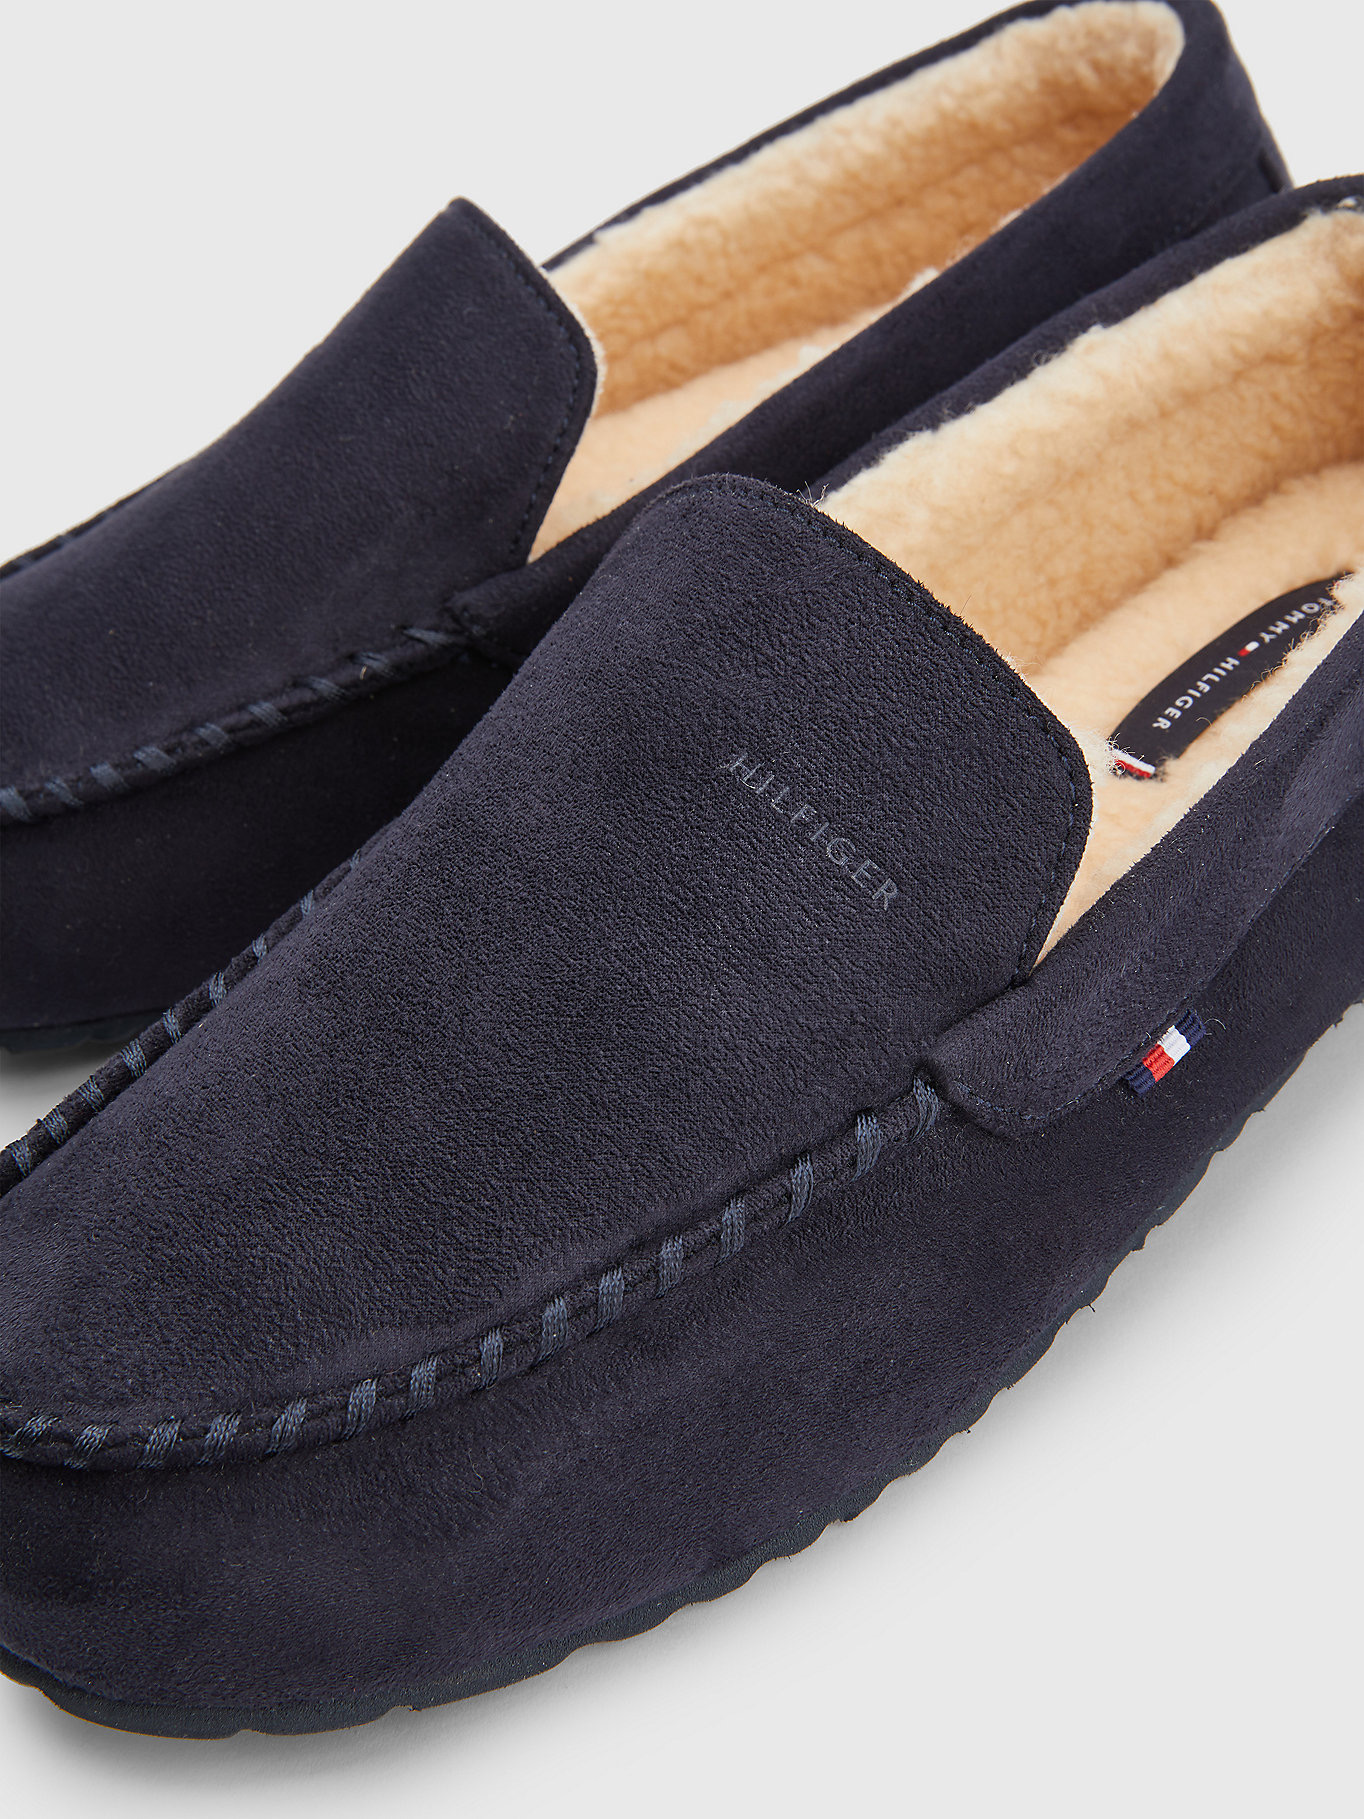 morgen Chemicus Prooi TOMMY HILFIGER DRIVER SLIPPER | Morans Menswear and Clothing, Thurles, Co.  Tipperary